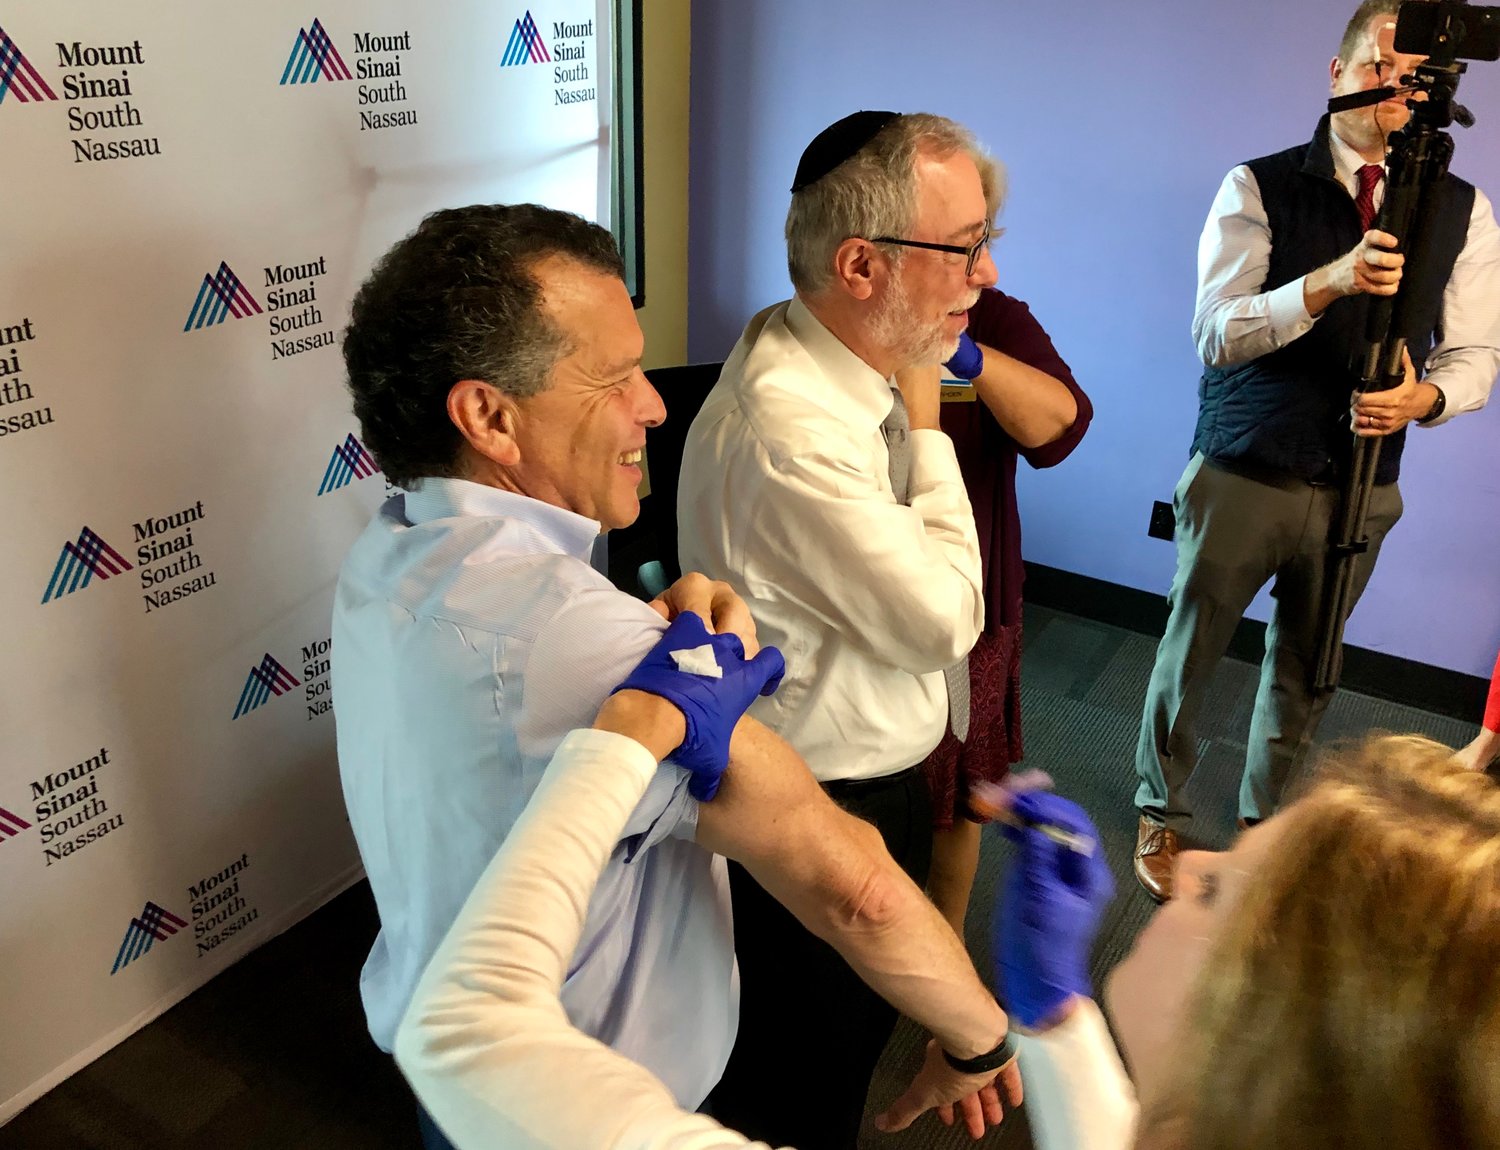 Dr. Aaron Glatt, right, chairman of the Mount Sinai South Nassau Department of Medicine, and Stuart Richner, publisher of Herald Community Newspapers, rolled up their sleeves to get their flu shots together at the Heralds’ offices in Garden City on Oct. 29.